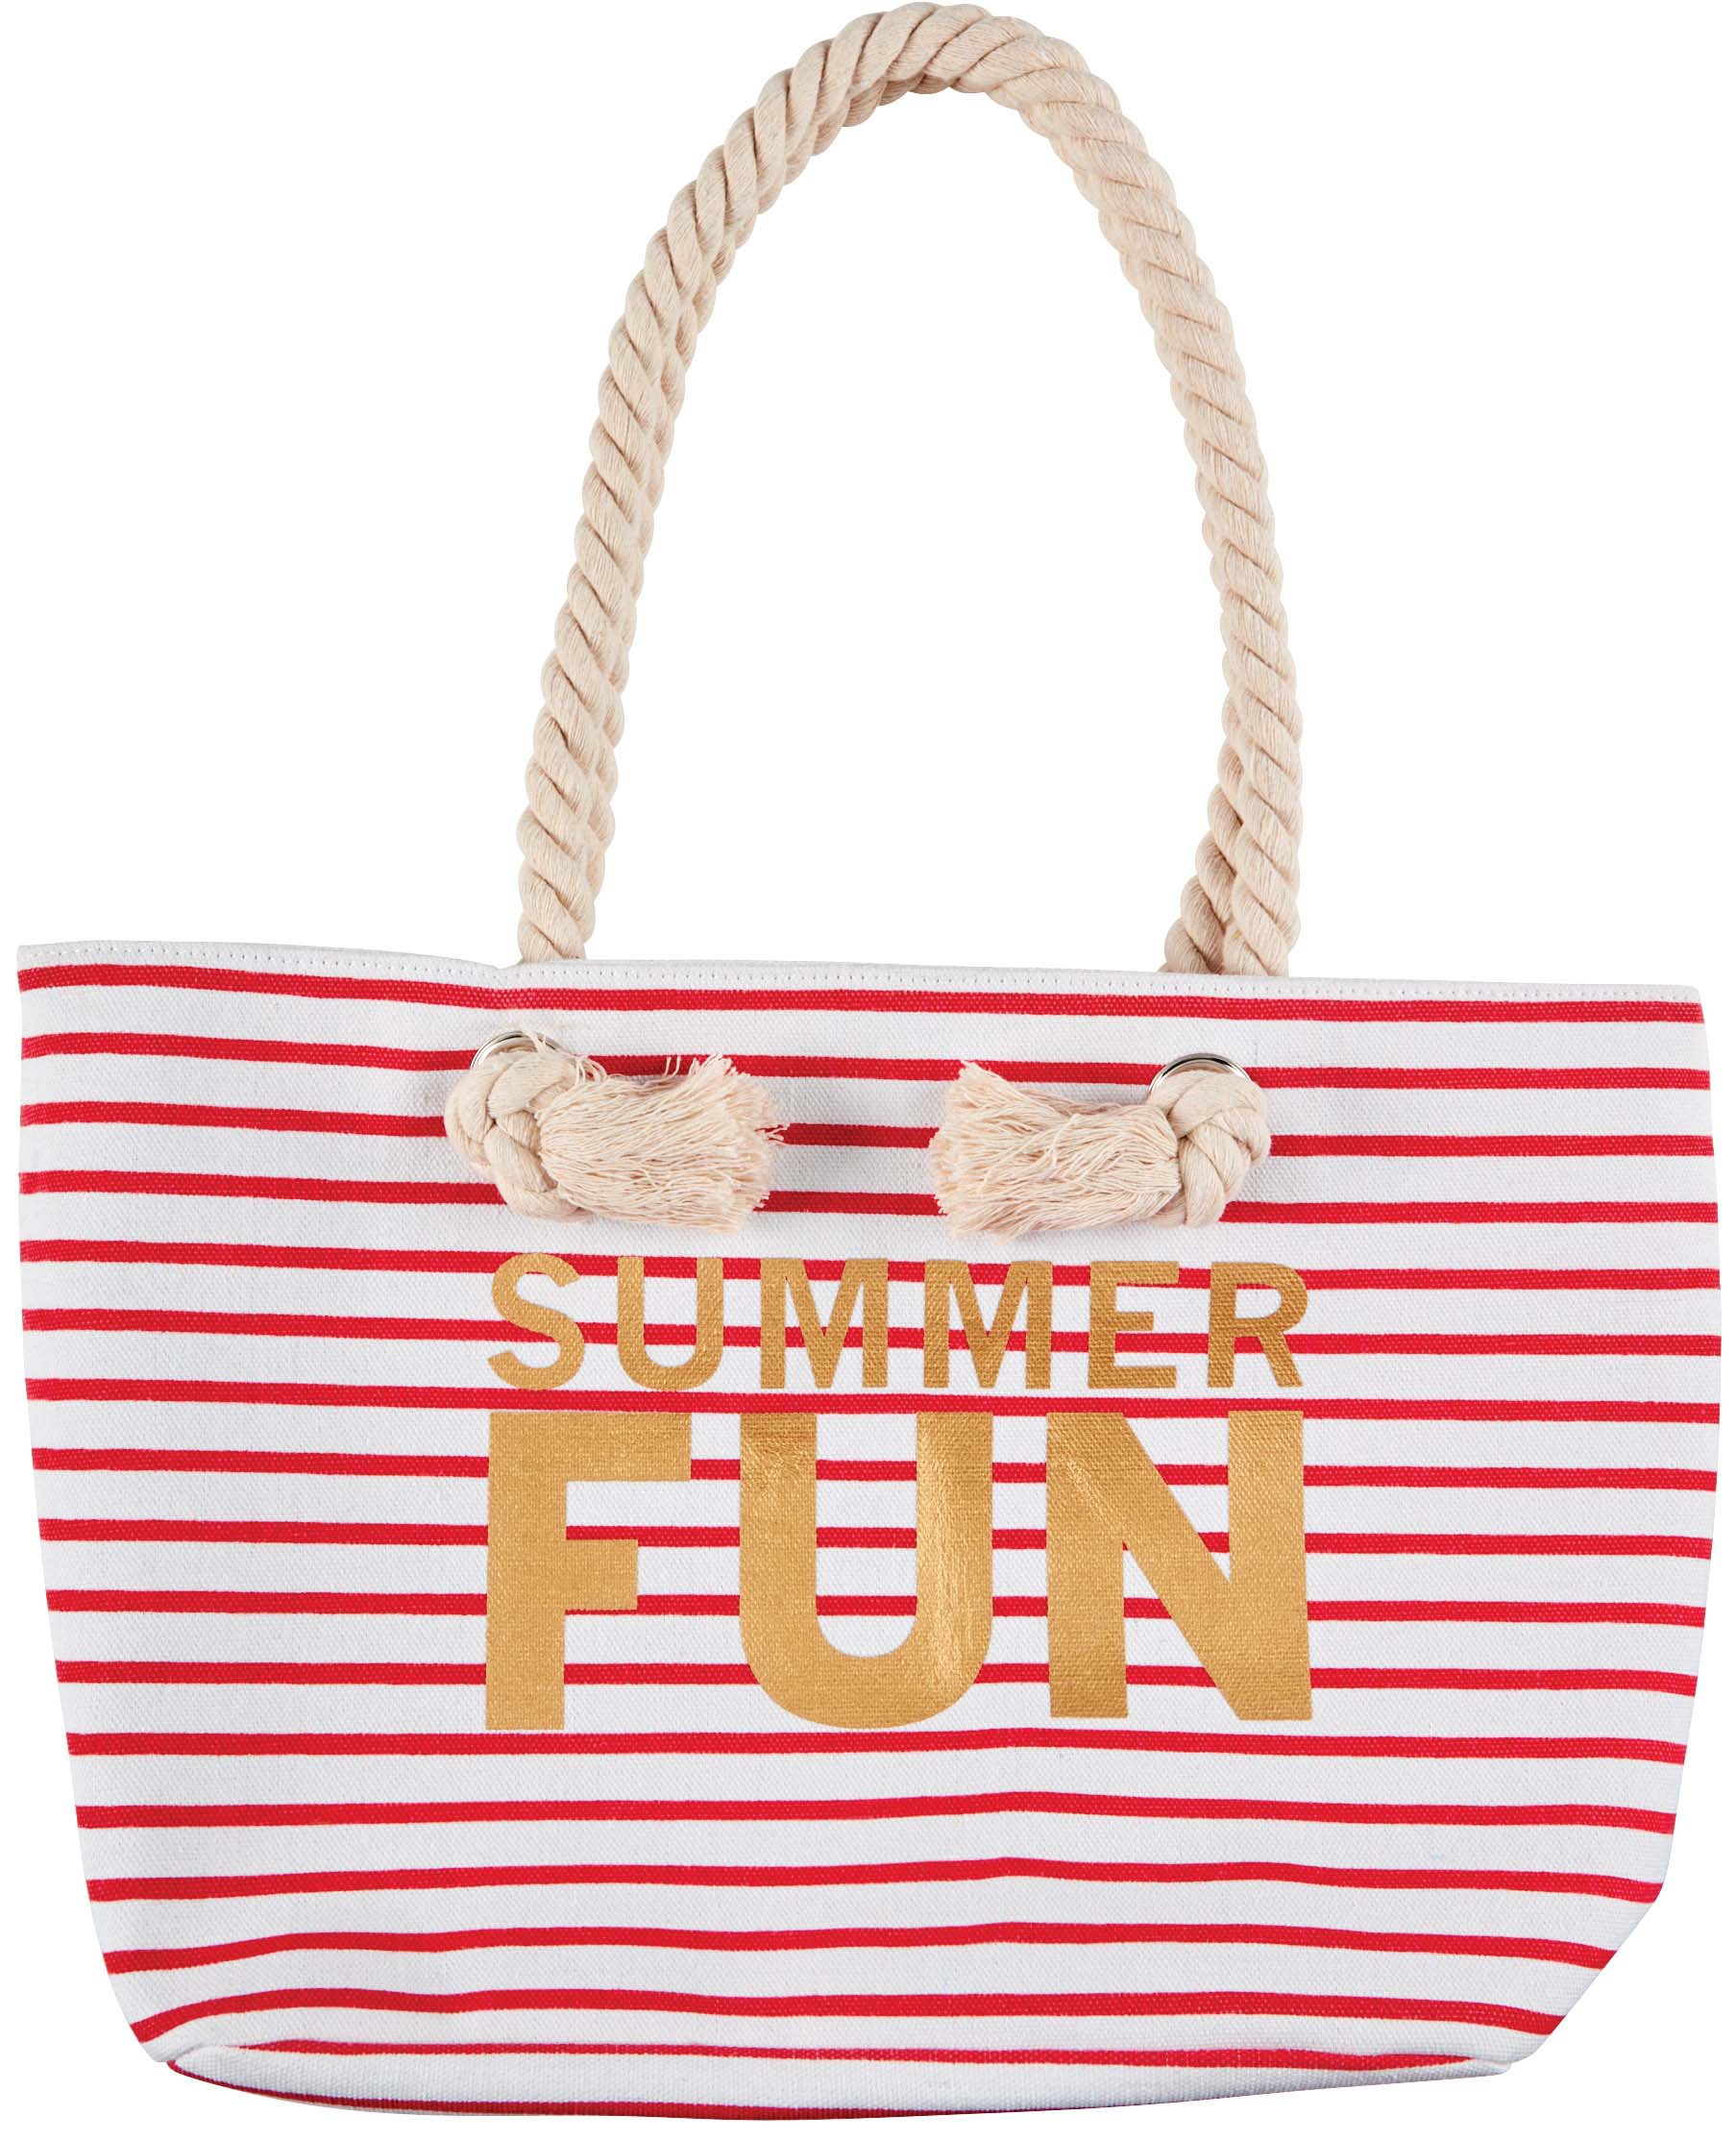 New Victoria's Secret Striped Pink and White Beach Tote Bag with